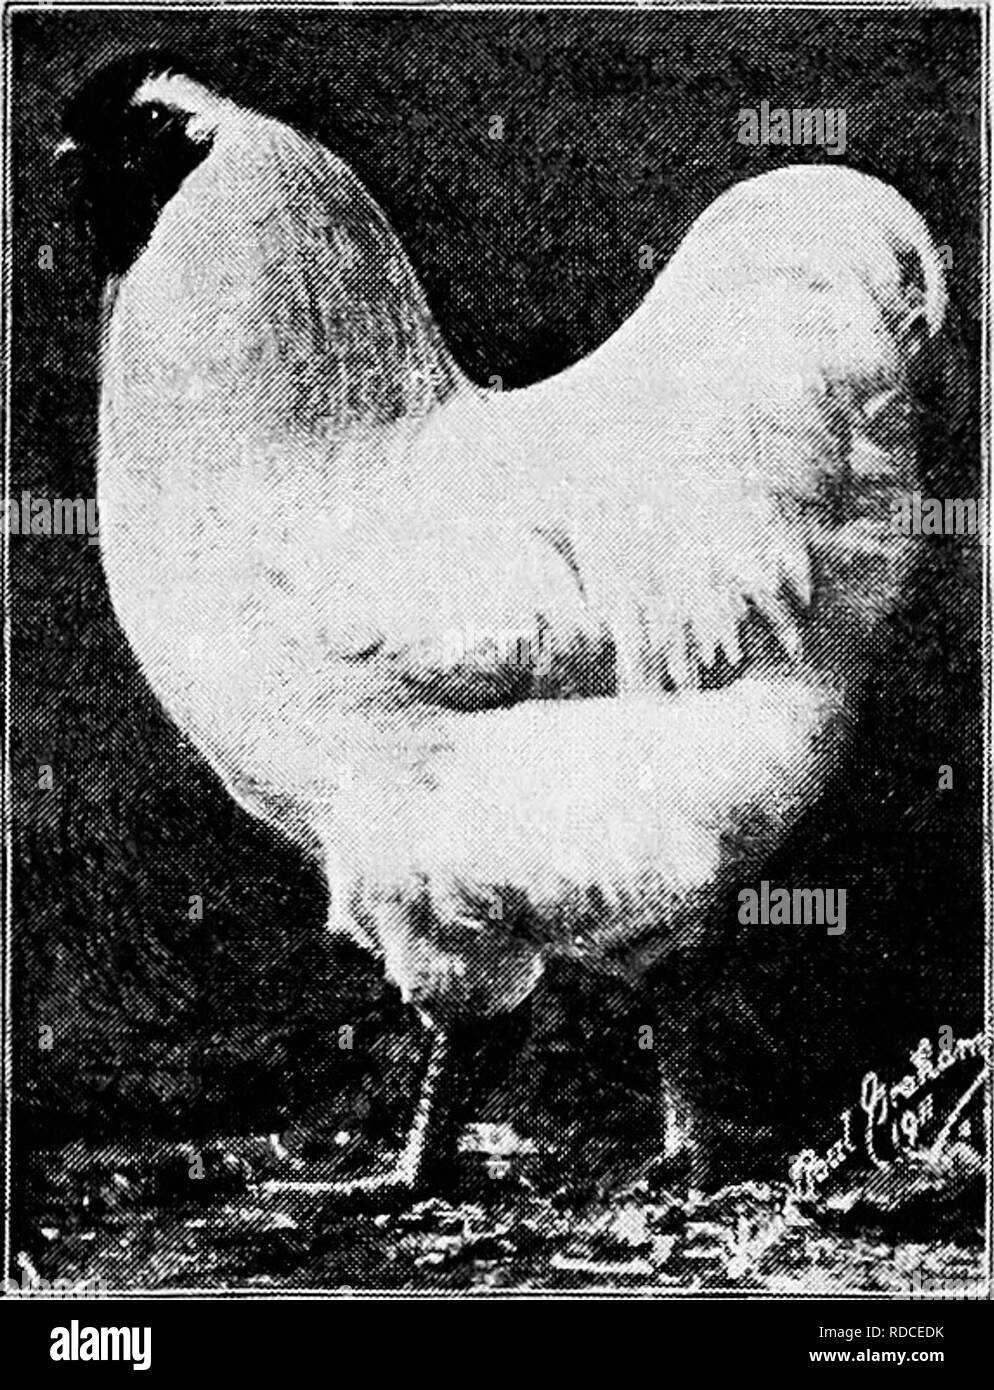 . Principles and practice of poultry culture . Poultry. Fig. 411. White Wyandotte pullet, owned by A. G. Duston, South Framingham, Massachusetts. (Pho- tograph by Sewell) traces of Light Brahma blood, time and wide distribution of the best stocks has gradually produced great uniformity of type. After the Barred Plym- outh Rock, the White Wyan- dotte became the most popular variety in America; and within ten years of its introduction it was regarded 'as a dangerous rival of the Barred Plymouth Rock. Had the competition been between the Barred Plym- outh Rock and the White Wy- andotte alone, the Stock Photo